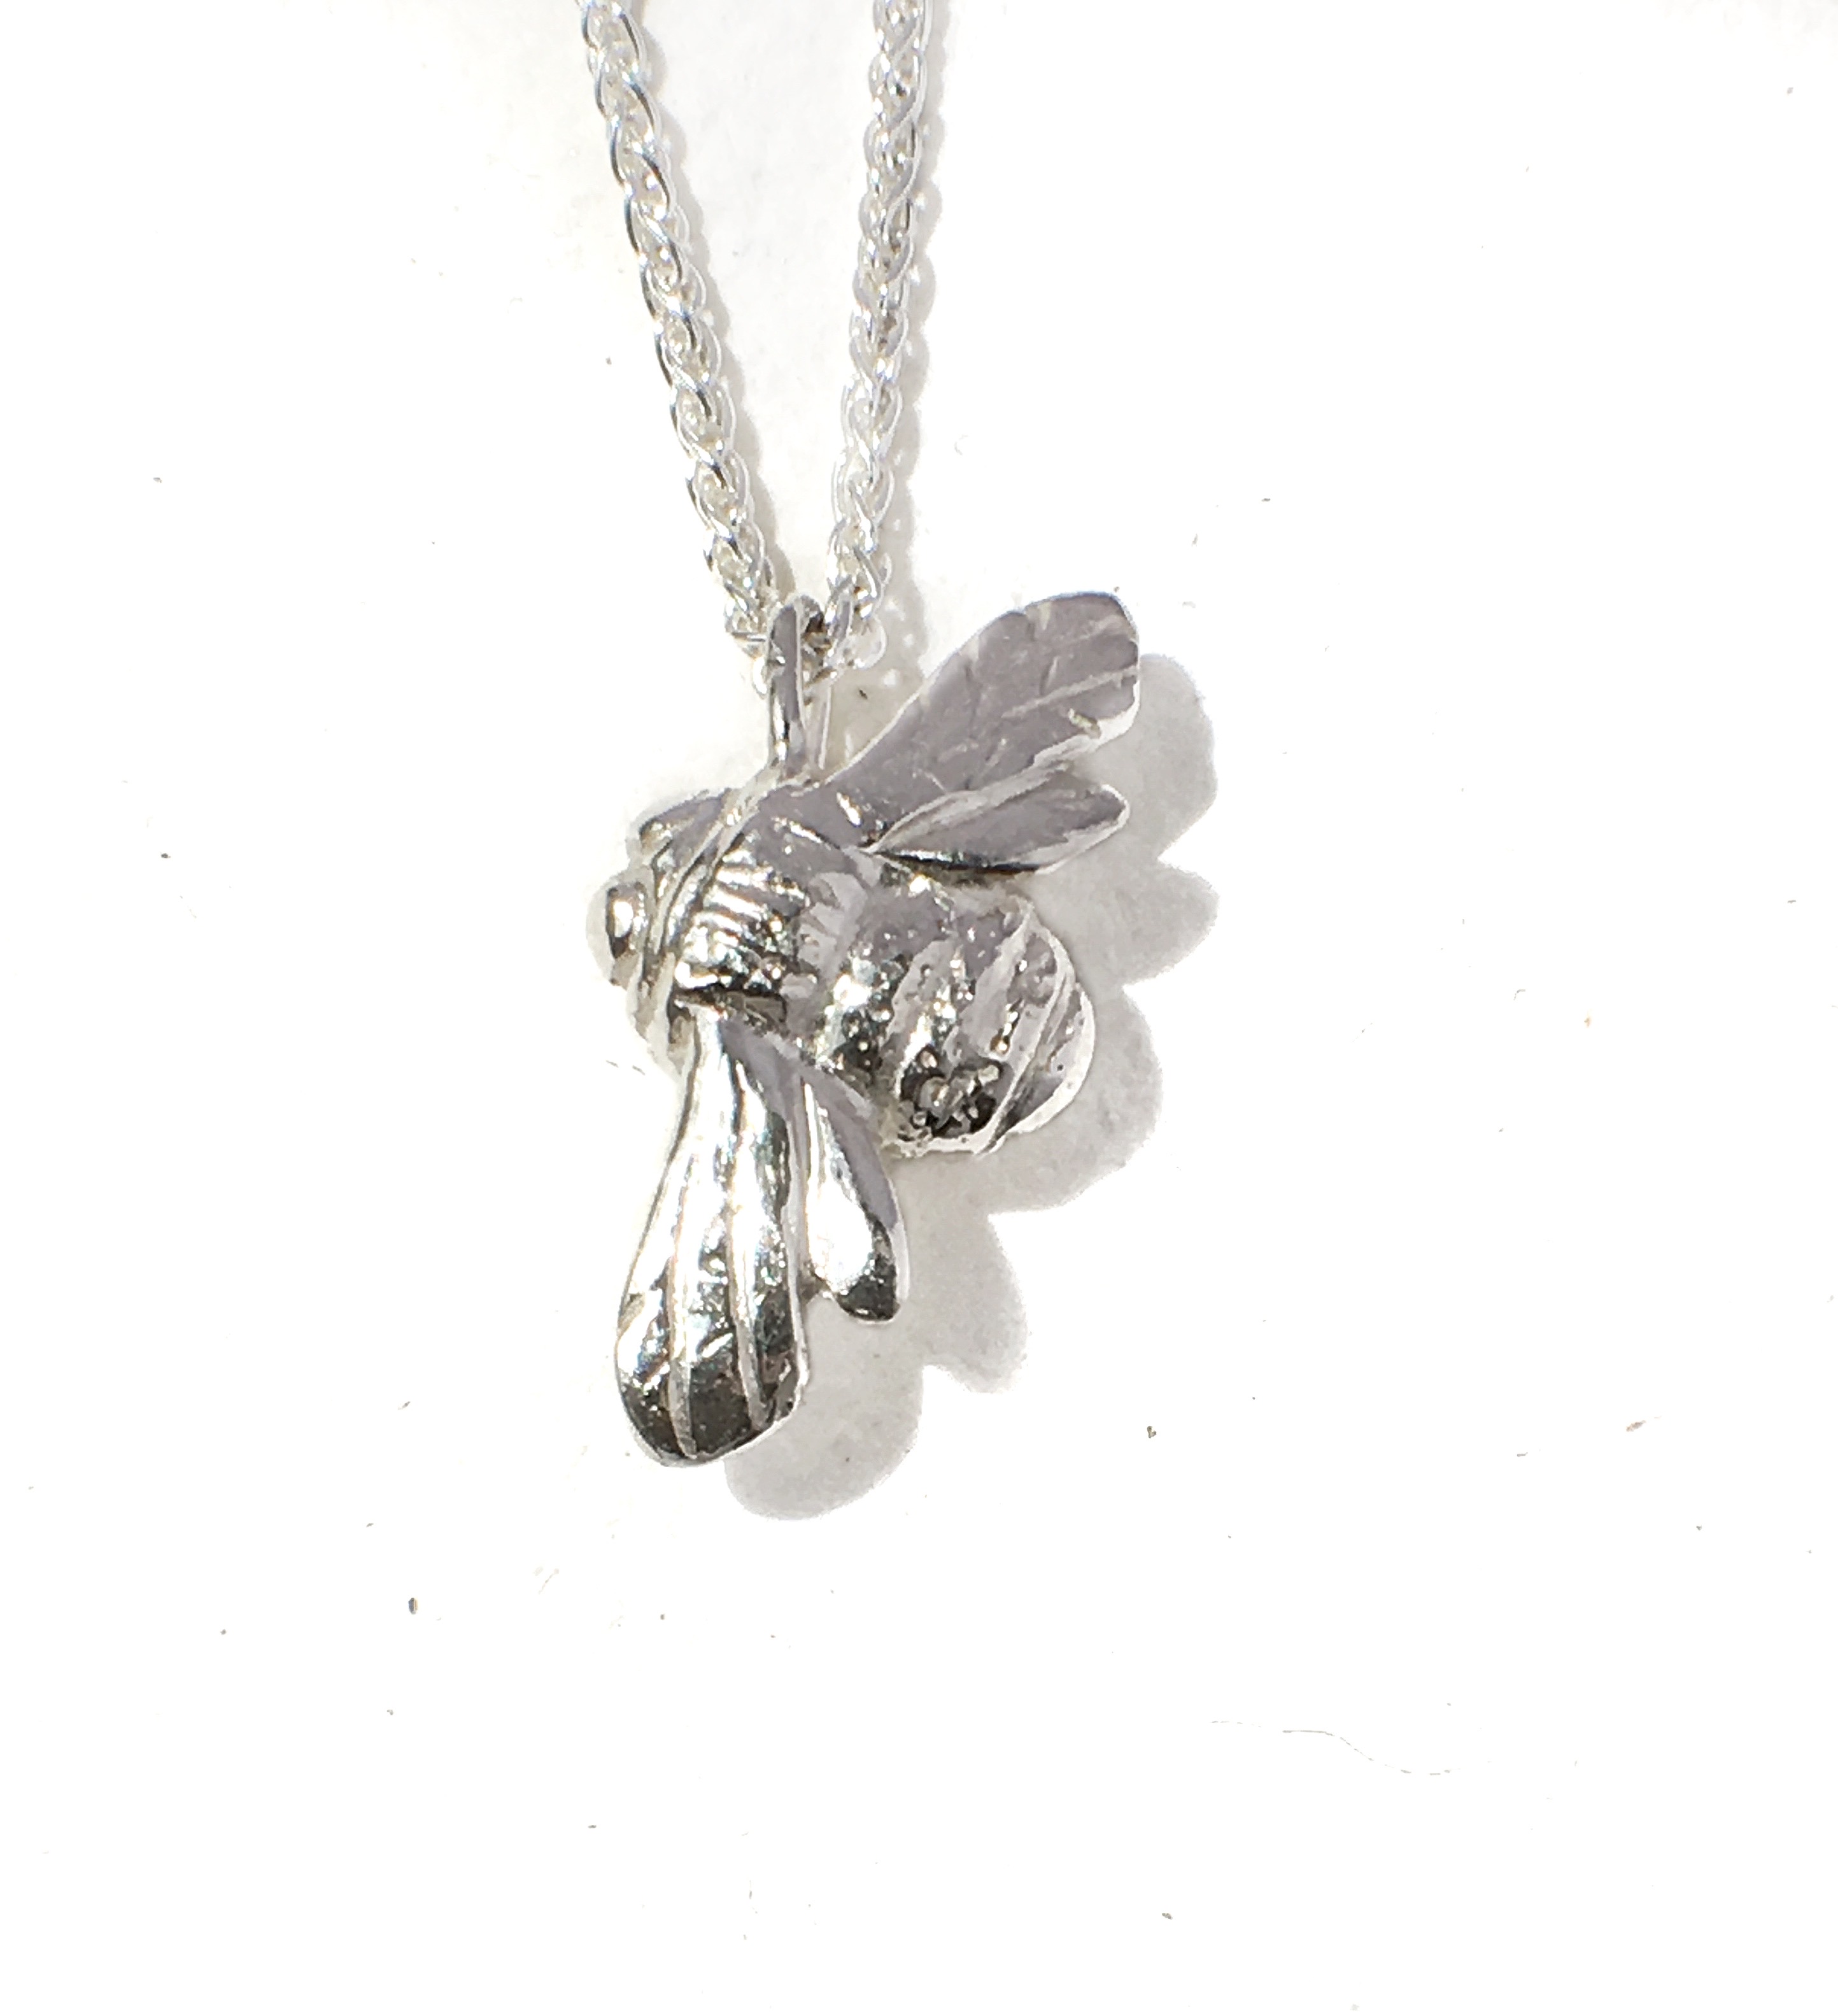 ♻️Recycled Sterling Silver Mixed Metal Bumble Bee Necklace